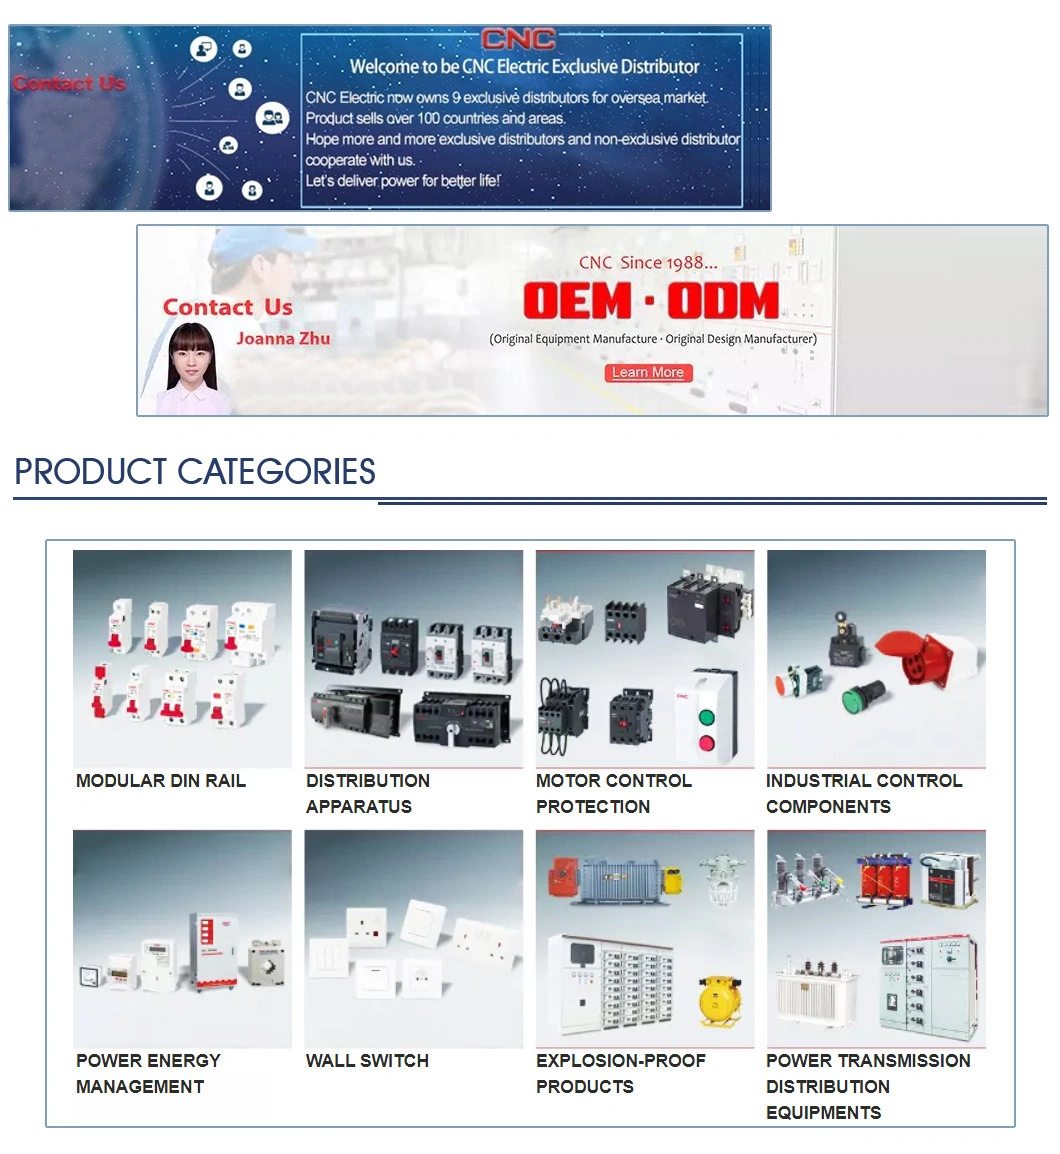 ELCB 160A ELCB (Earth Leakage Circuit Breaker) with Cable & Plug Earth Leakage Protection